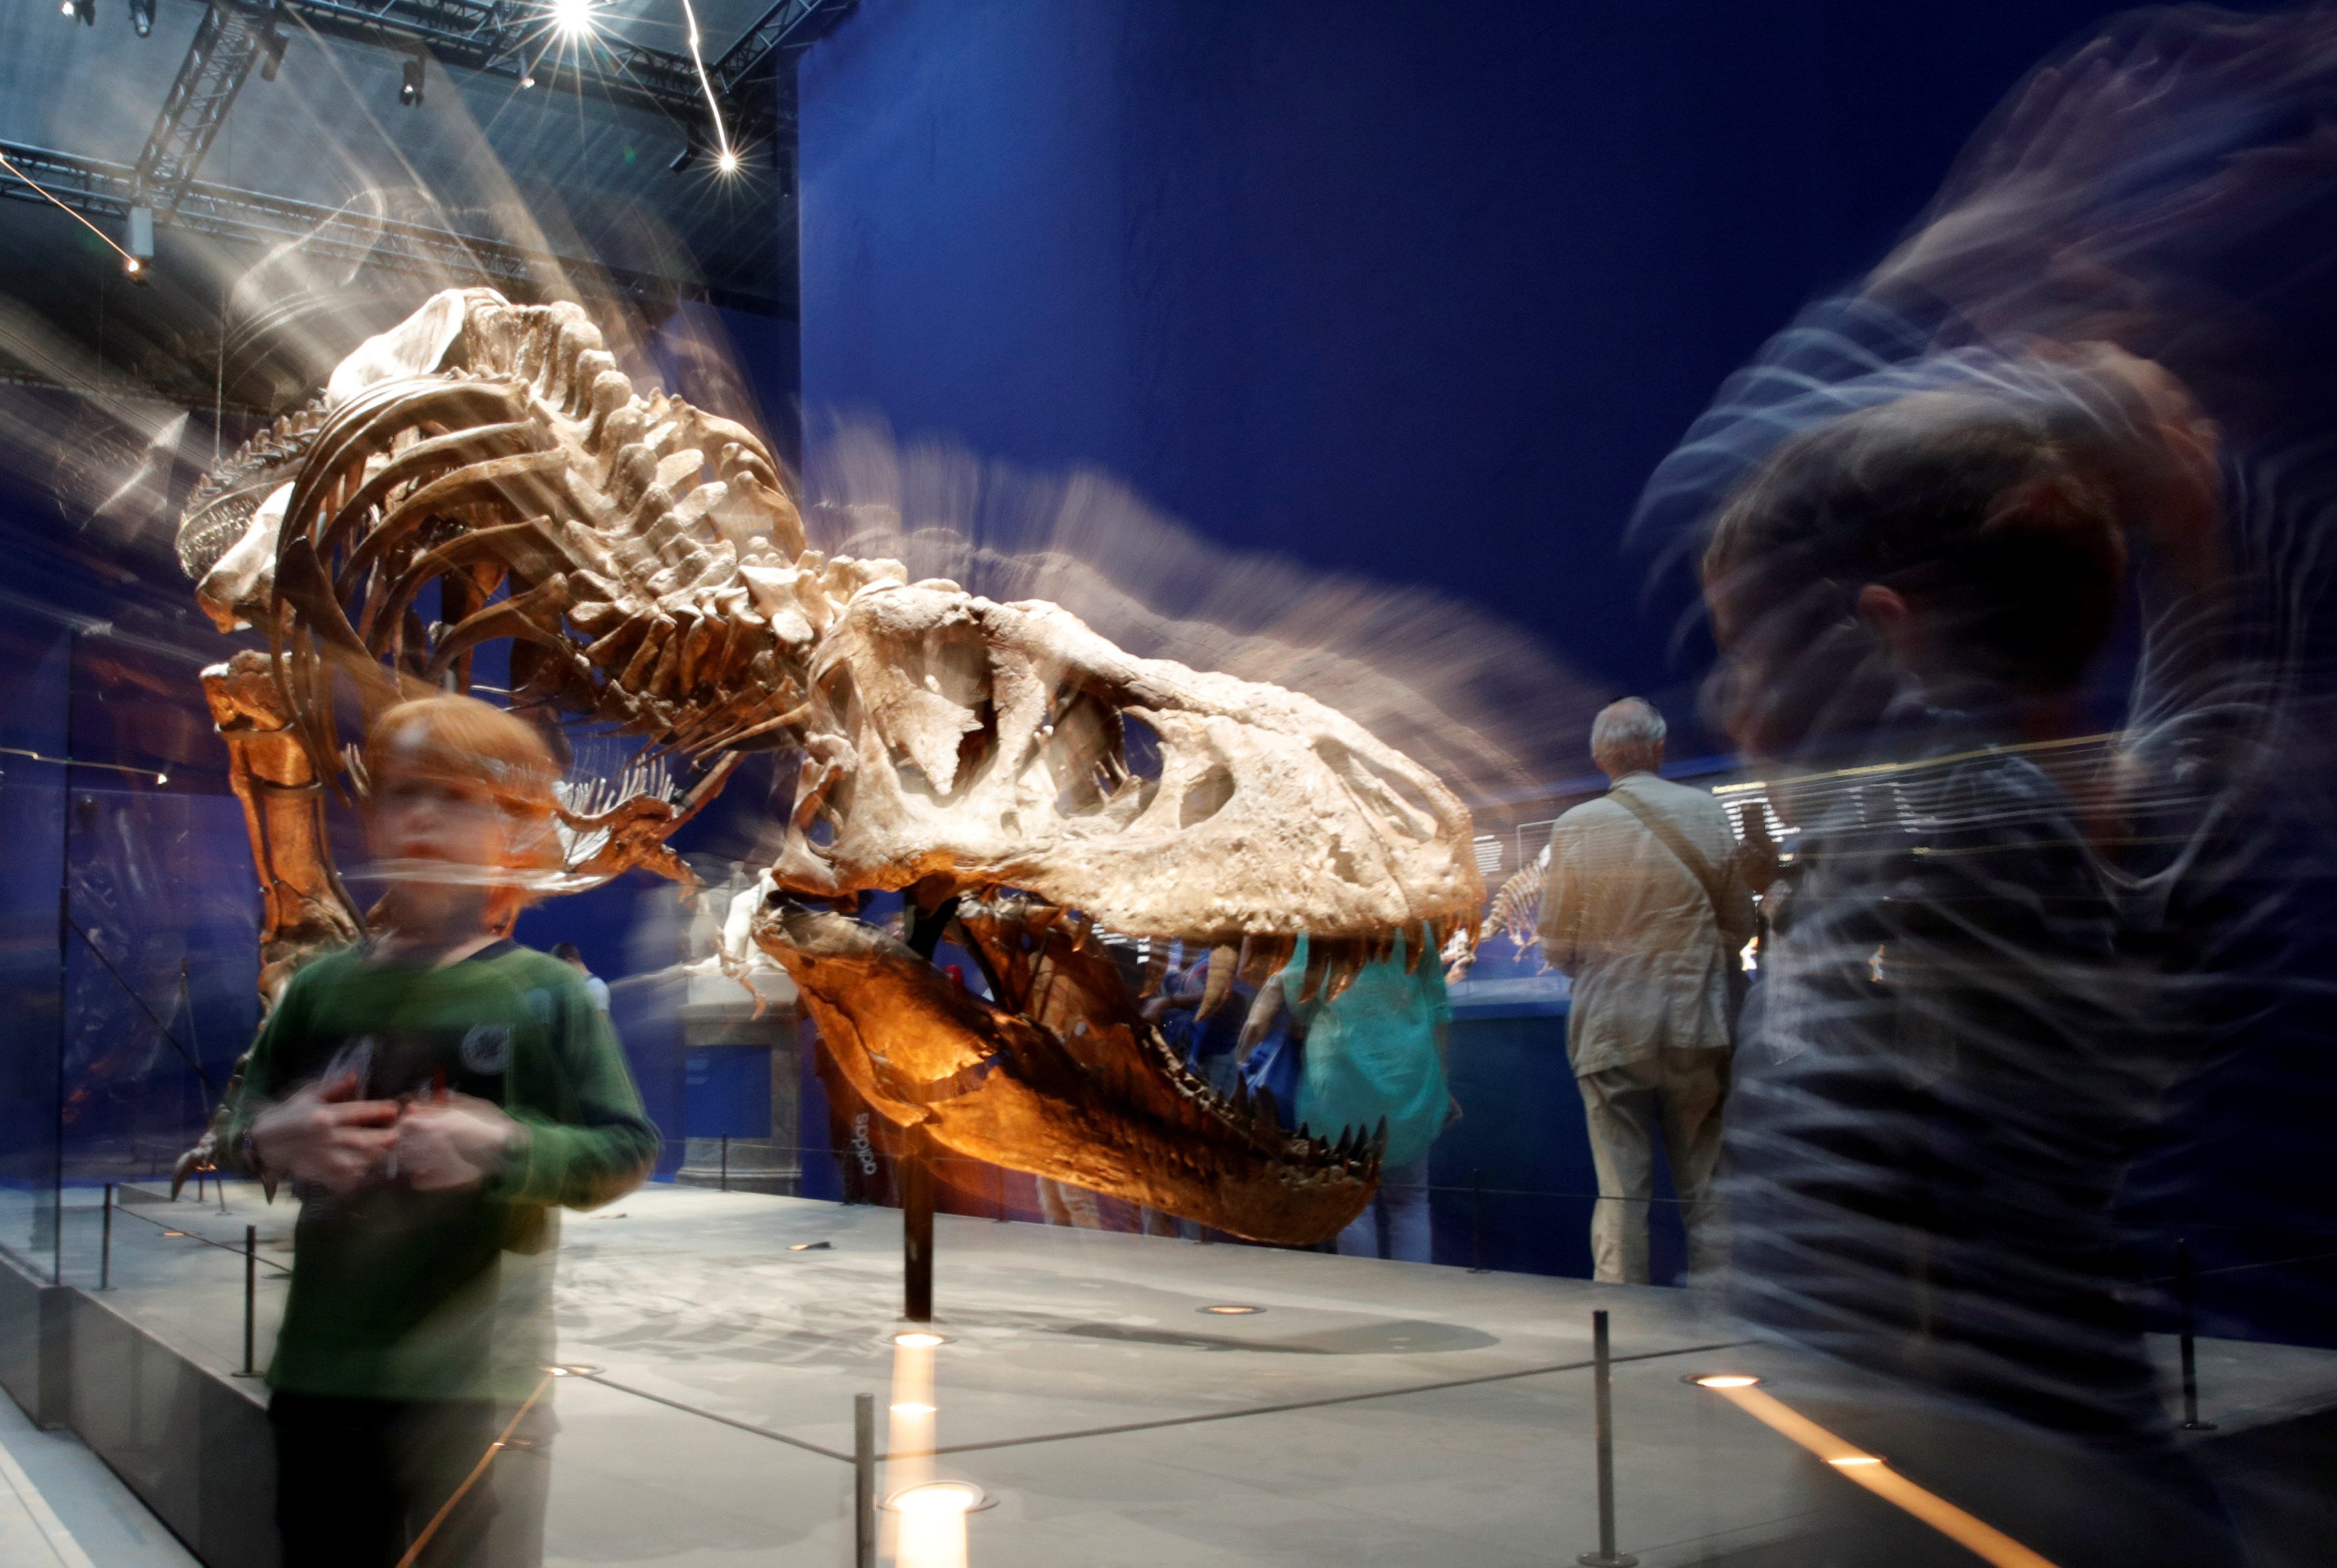 Trix is one of the most complete Tyrannosaurus skeletons in the world, with 75 per cent of her bones in ‘excellent form’ and her enormous teeth frozen in a sinister grin